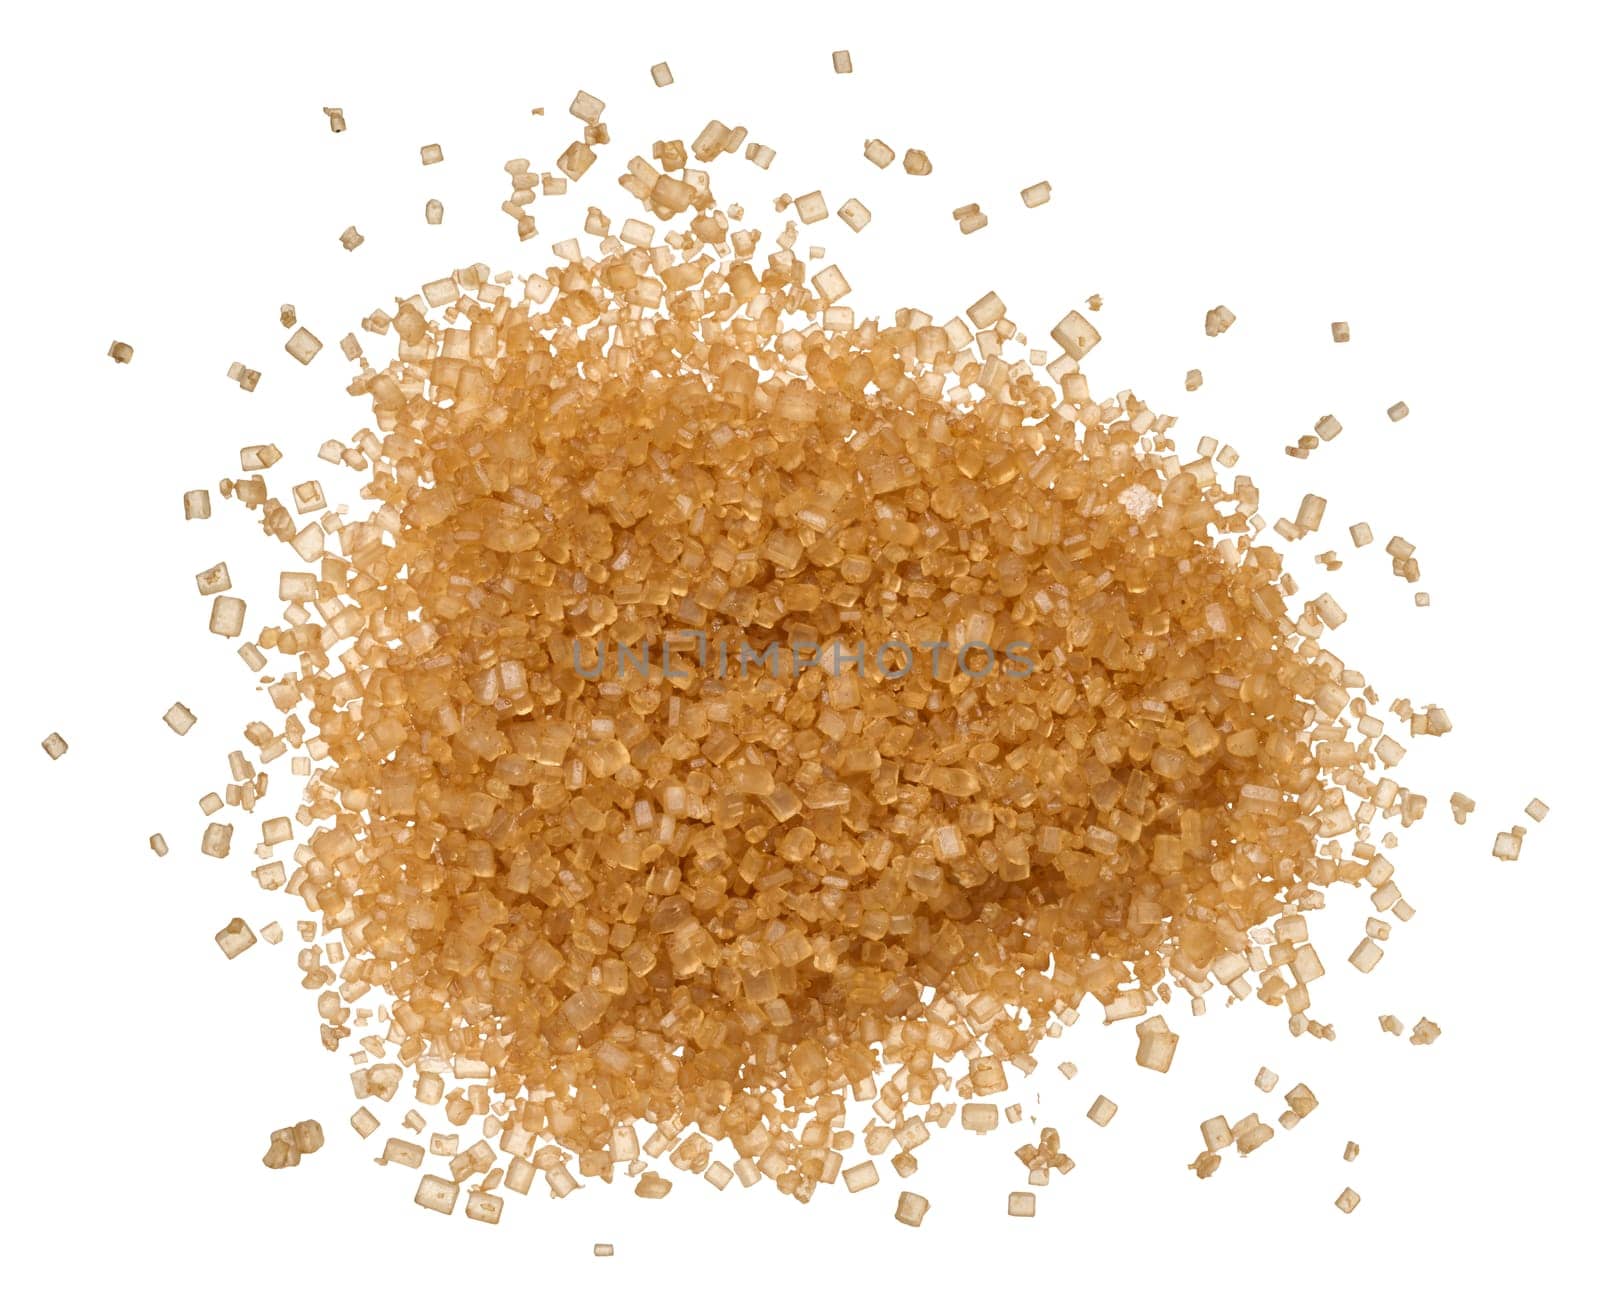 Brown cane sugar granules on isolated background by ndanko